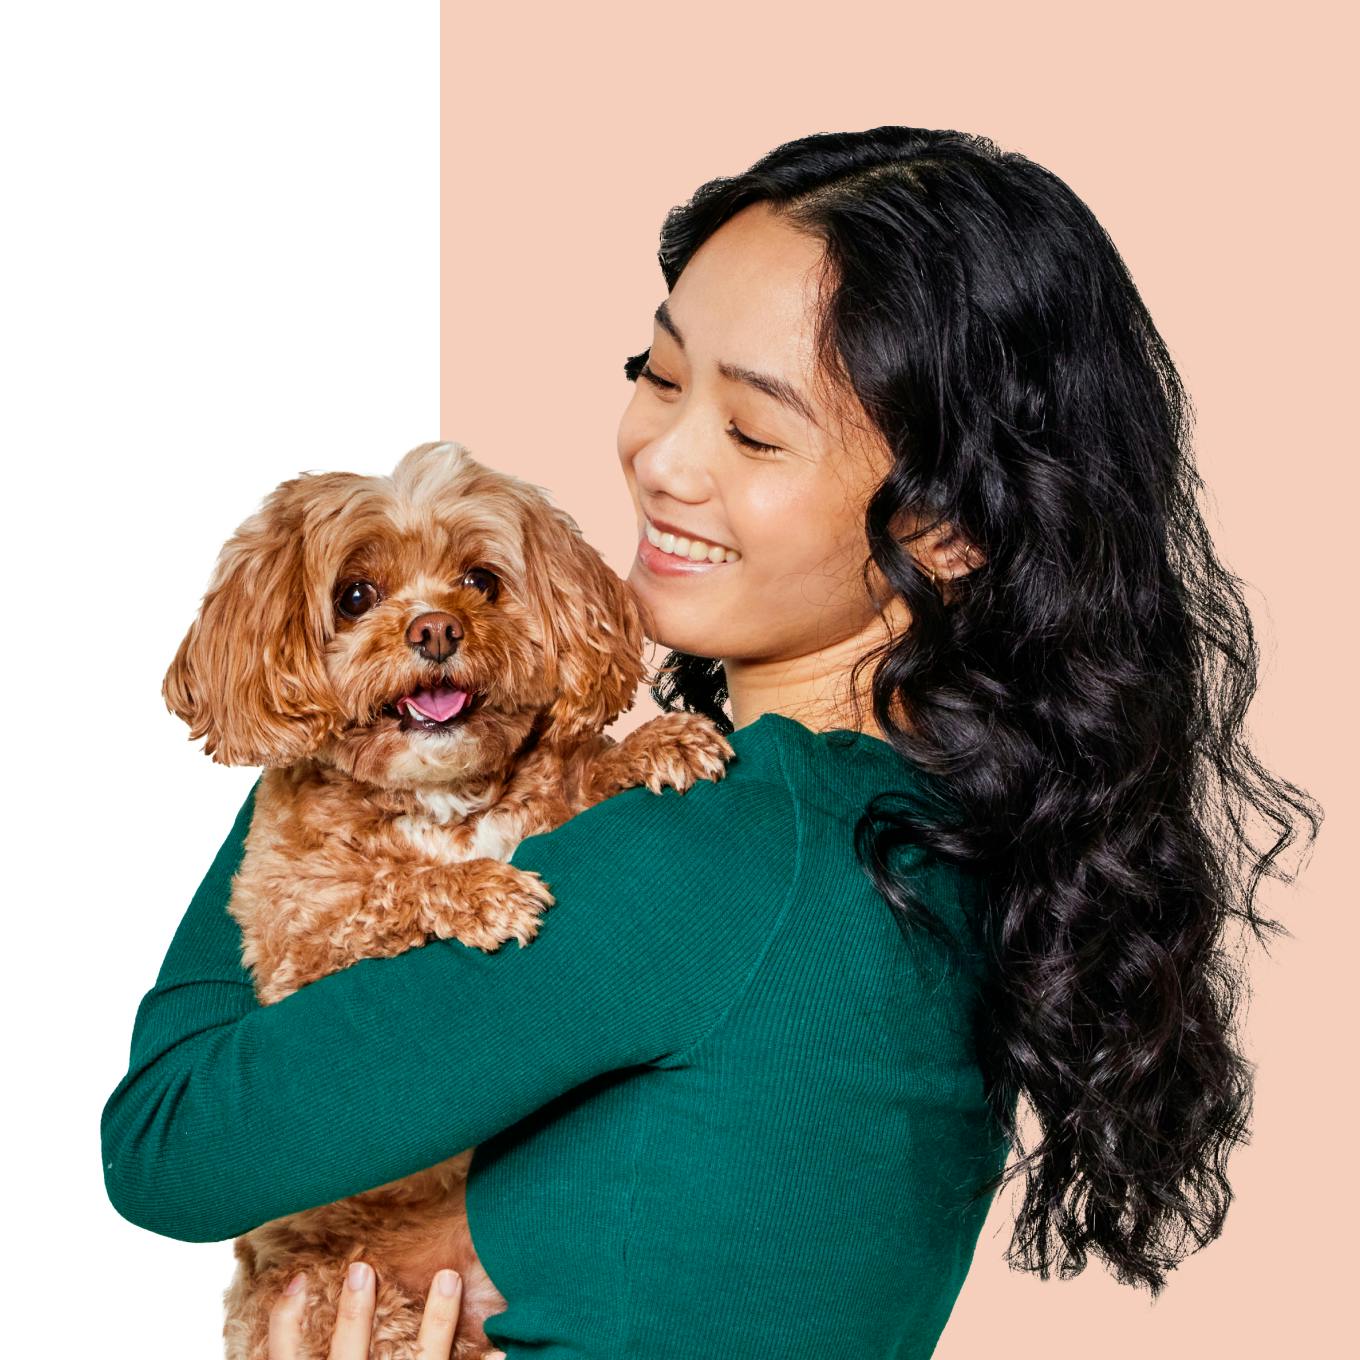 A smiling woman holding a small brown dog.